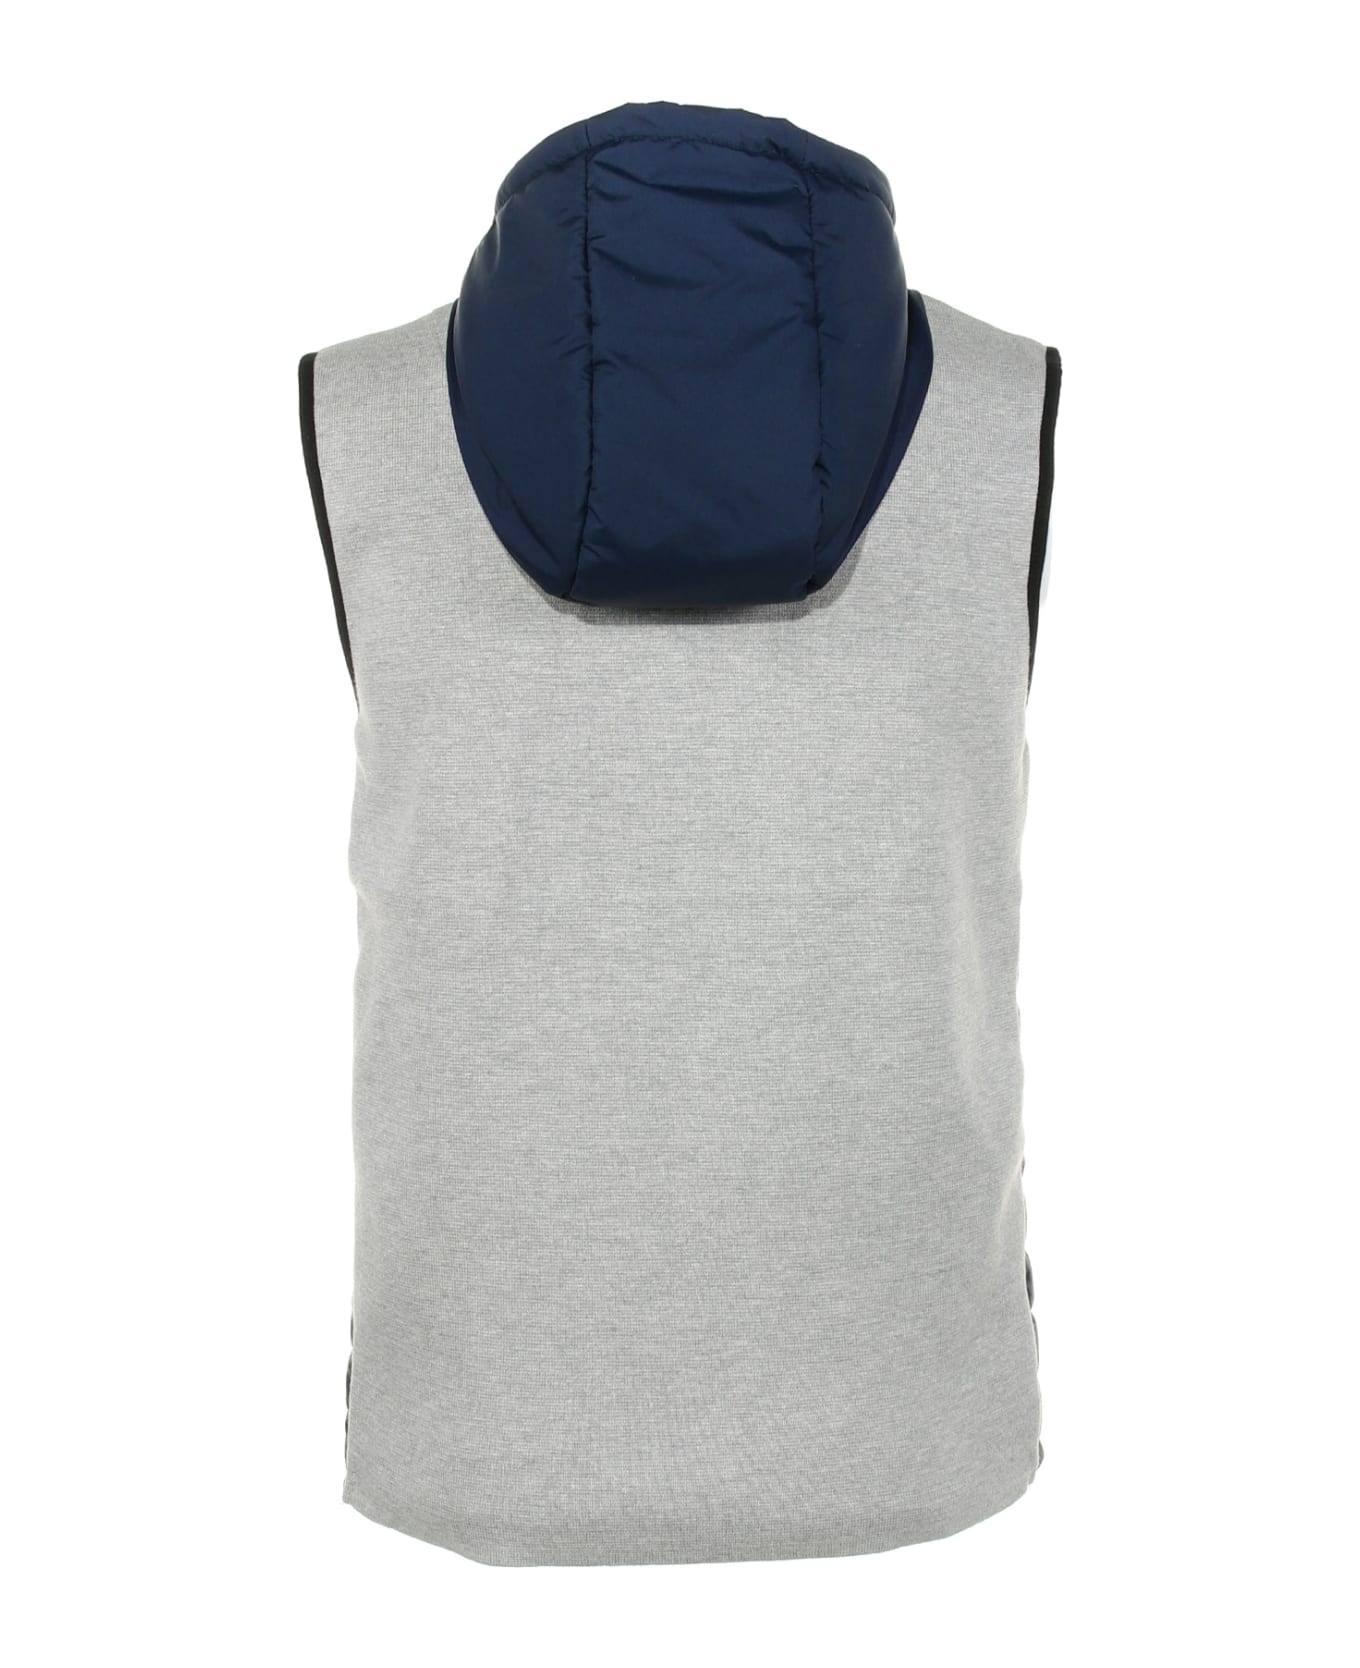 Ecoalf Quilted Vest With Hood - MIDNIGHT NAVY ベスト